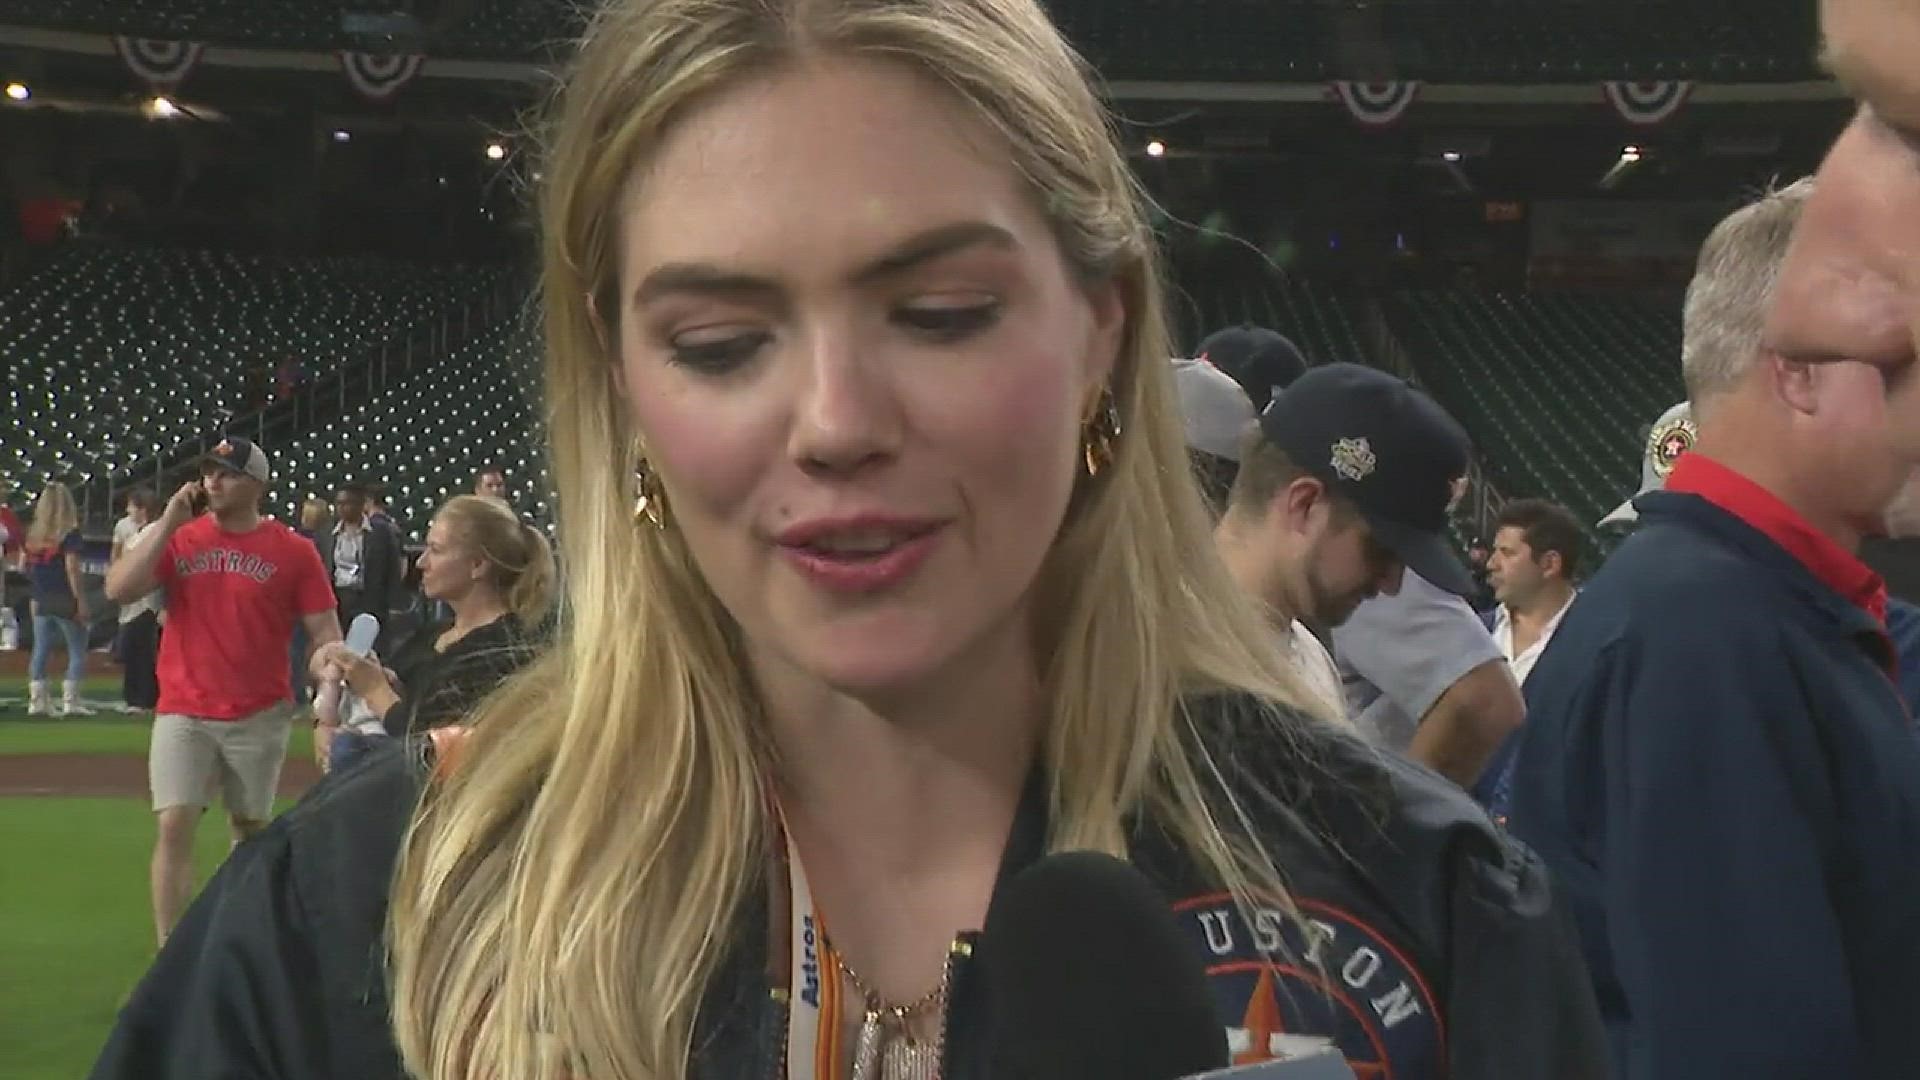 Jason Bristol caught up with Kate Upton after the Astros won the World Series, and asked her about Justin Verlander getting that elusive World Series win.